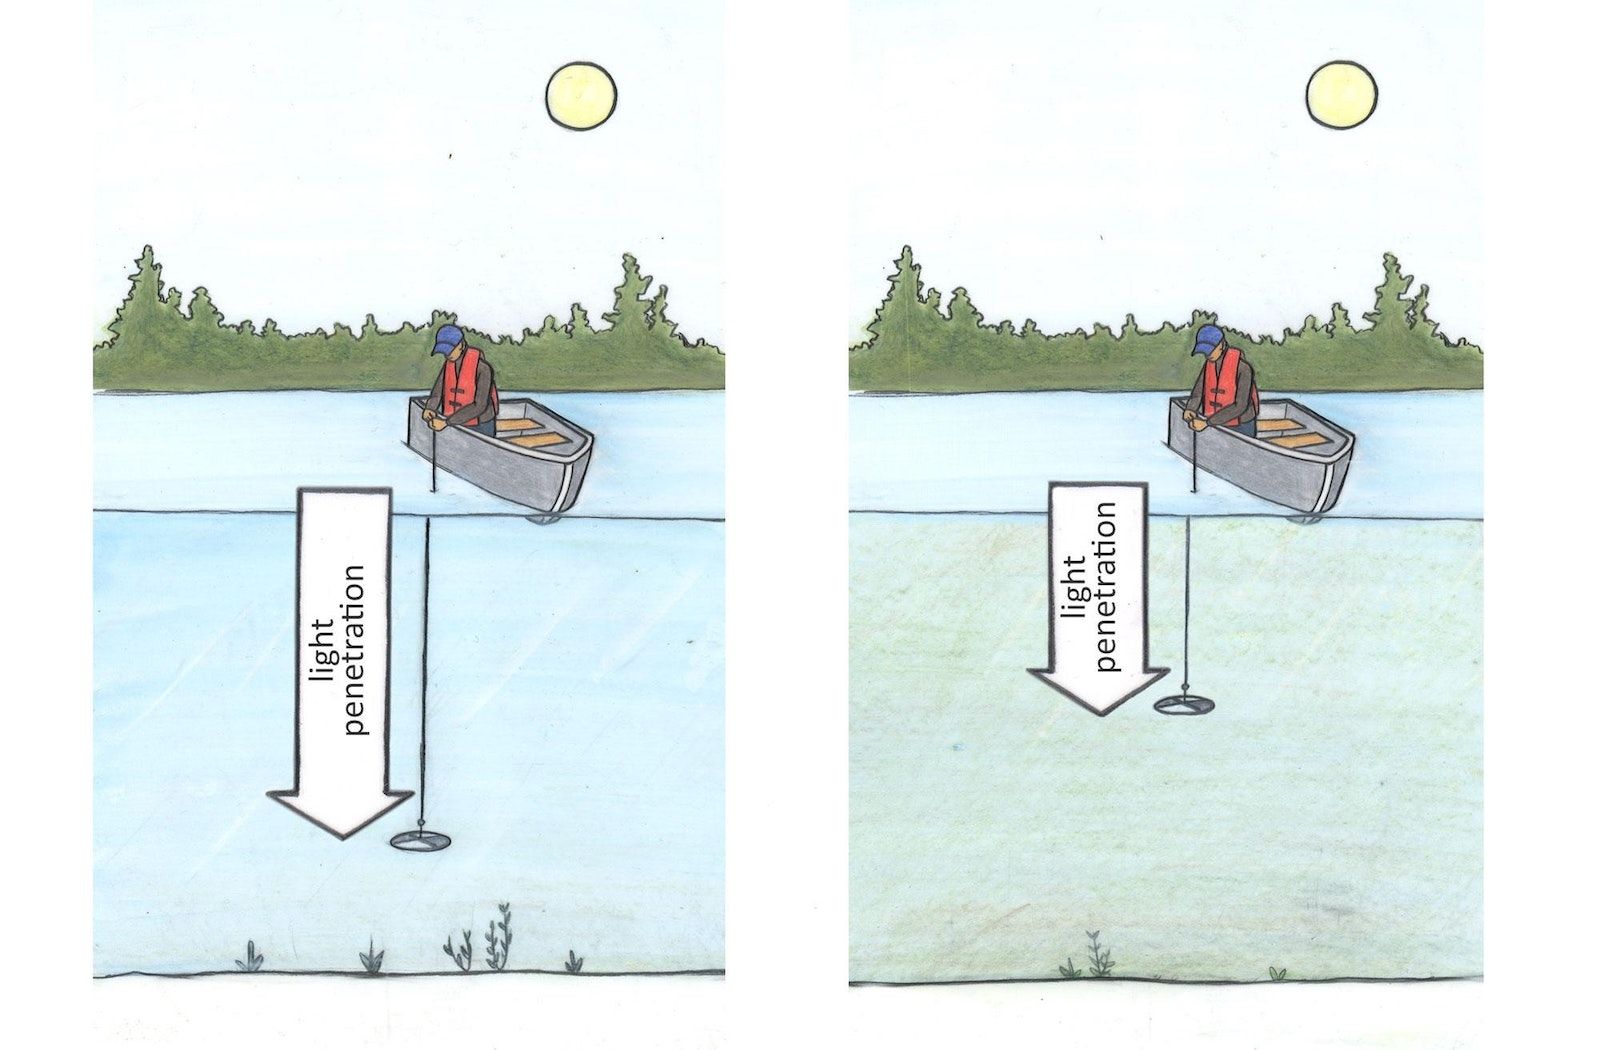 Two drawings showing a man in a red jacket leaning over the edge of a small boat, demonstrating the use of the Secchi disk in a body of water. The image on the left shows a deeper penetration of the Secchi disc in clearer water and the image on the right shows a shallower penetration in murkier water.